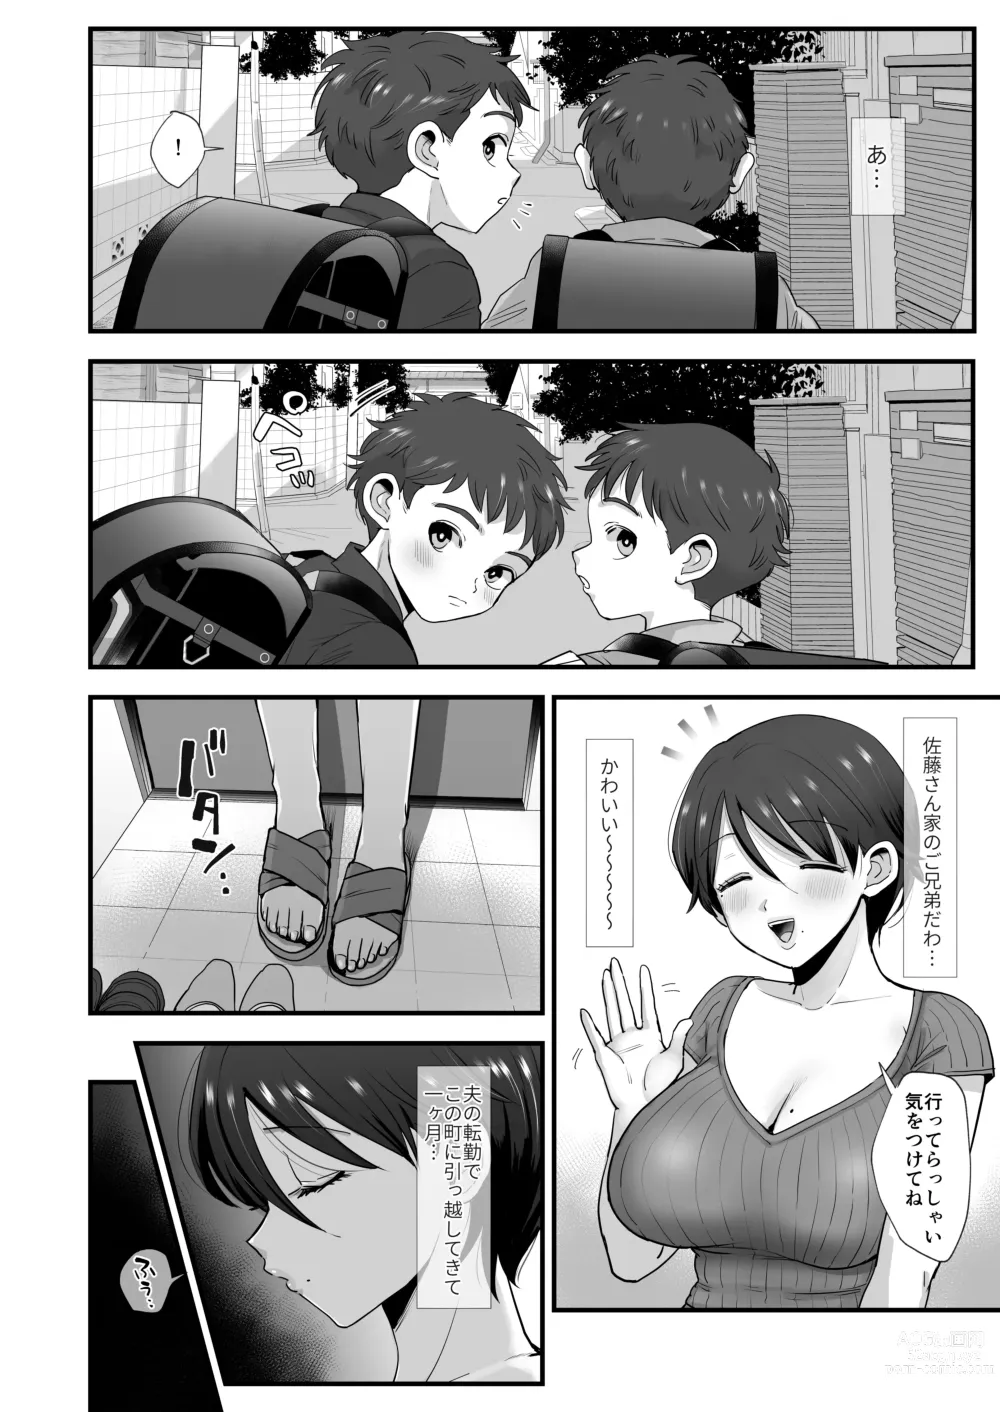 Page 4 of doujinshi Gentle, Busty, Narrow Eyed Momma.